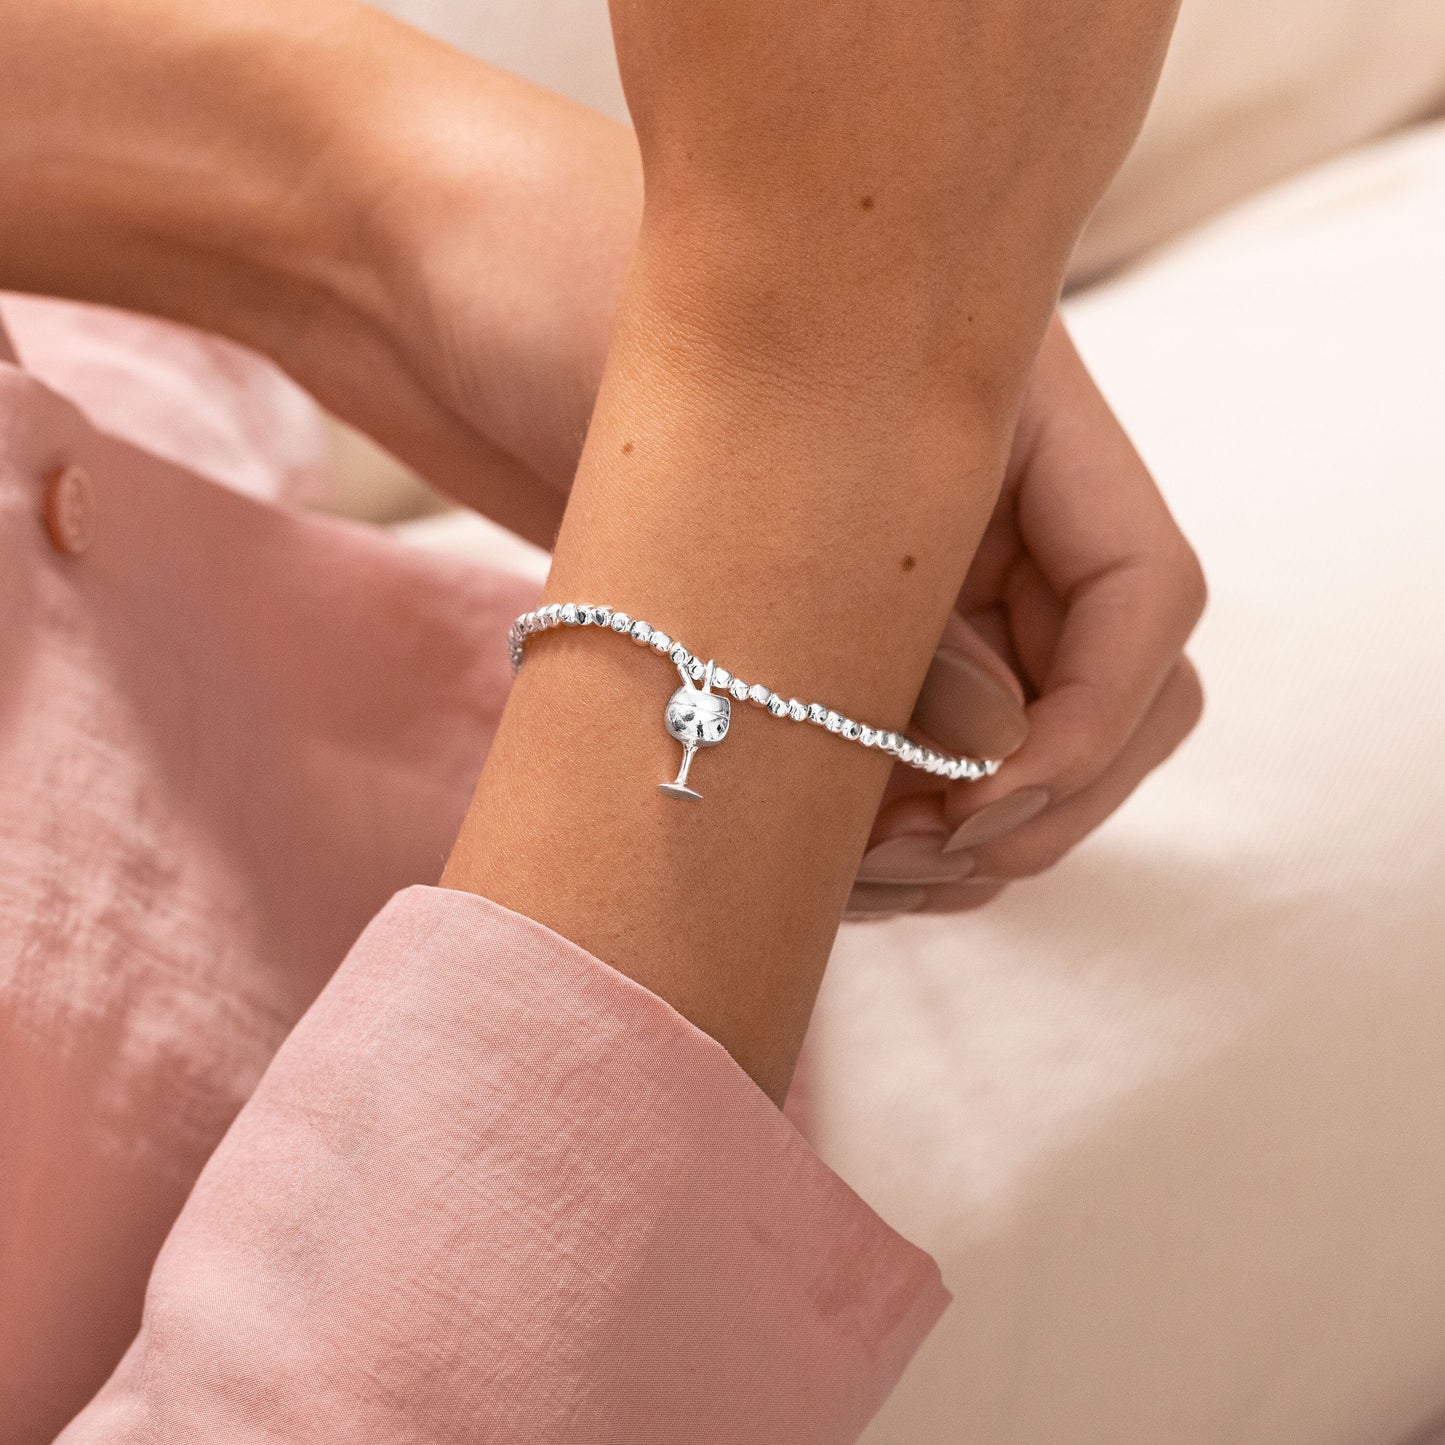 RADIANCE A LITTLE 'YOU ARE GIN-CREDIBLE' BRACELET